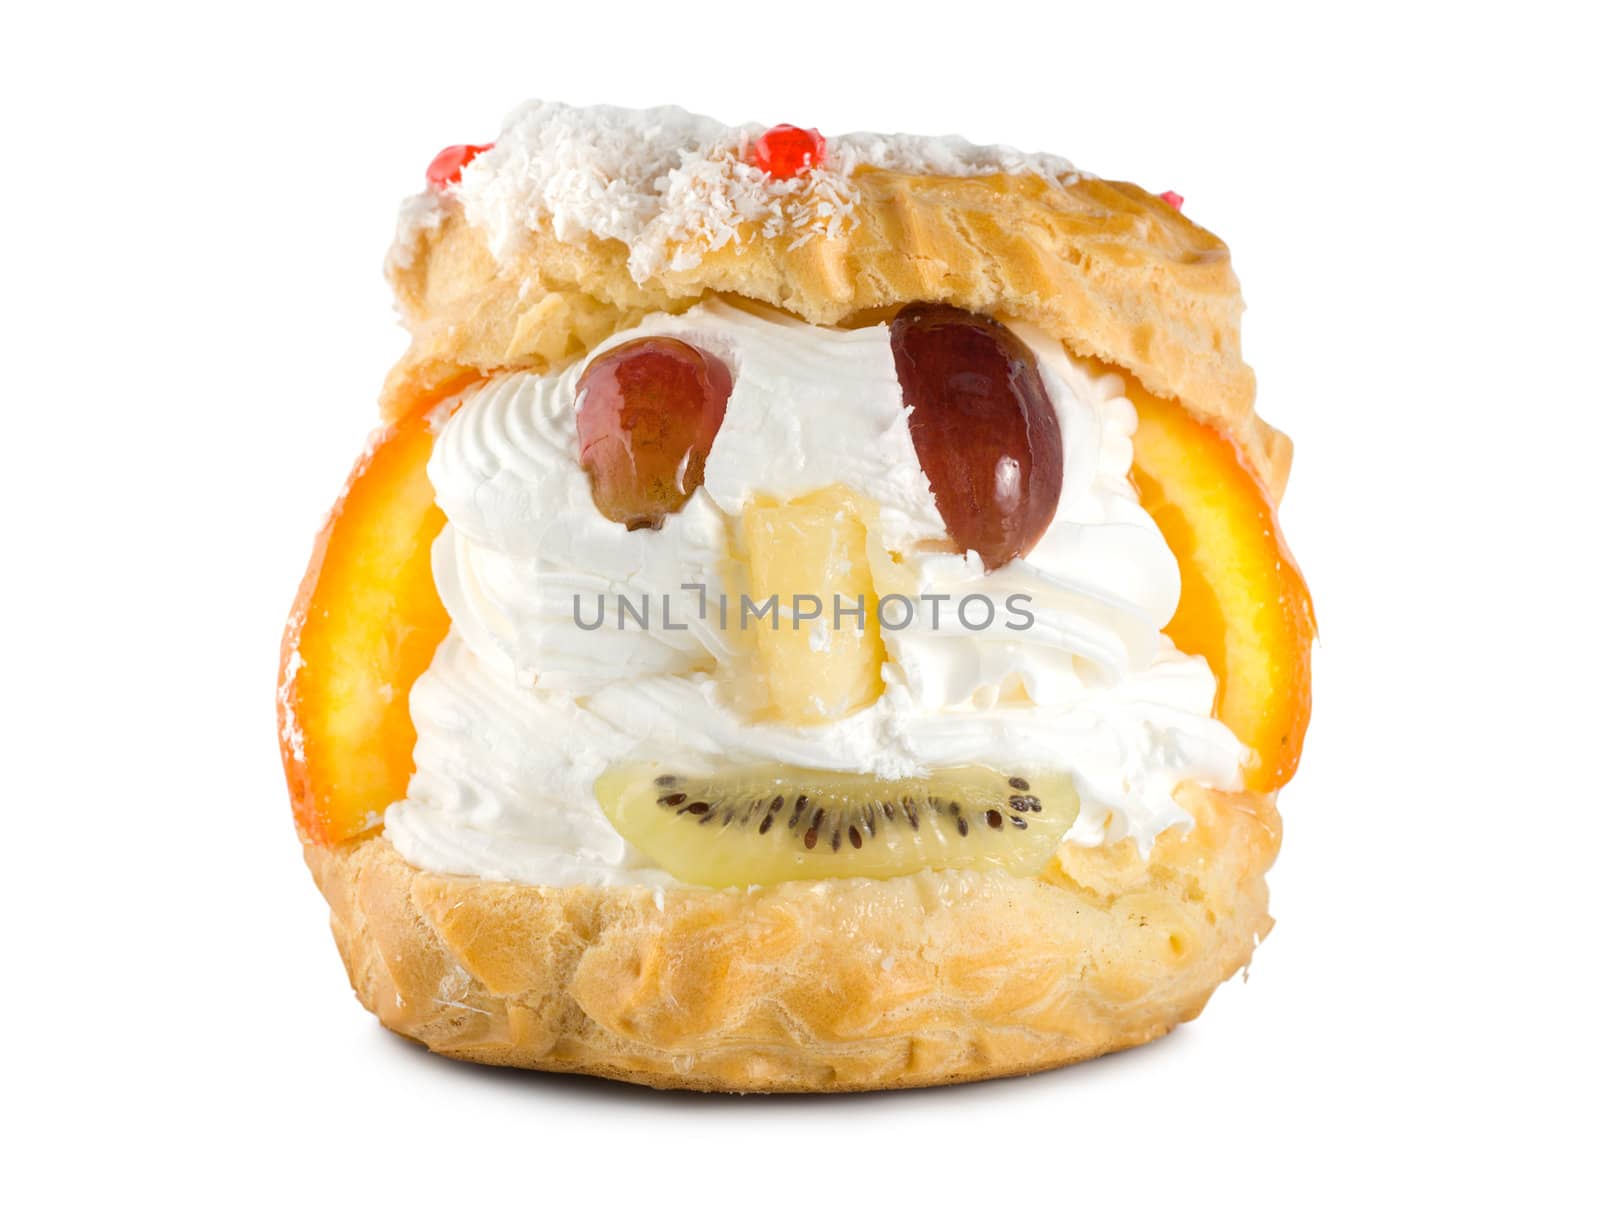 A cake with a face isolated on a white background